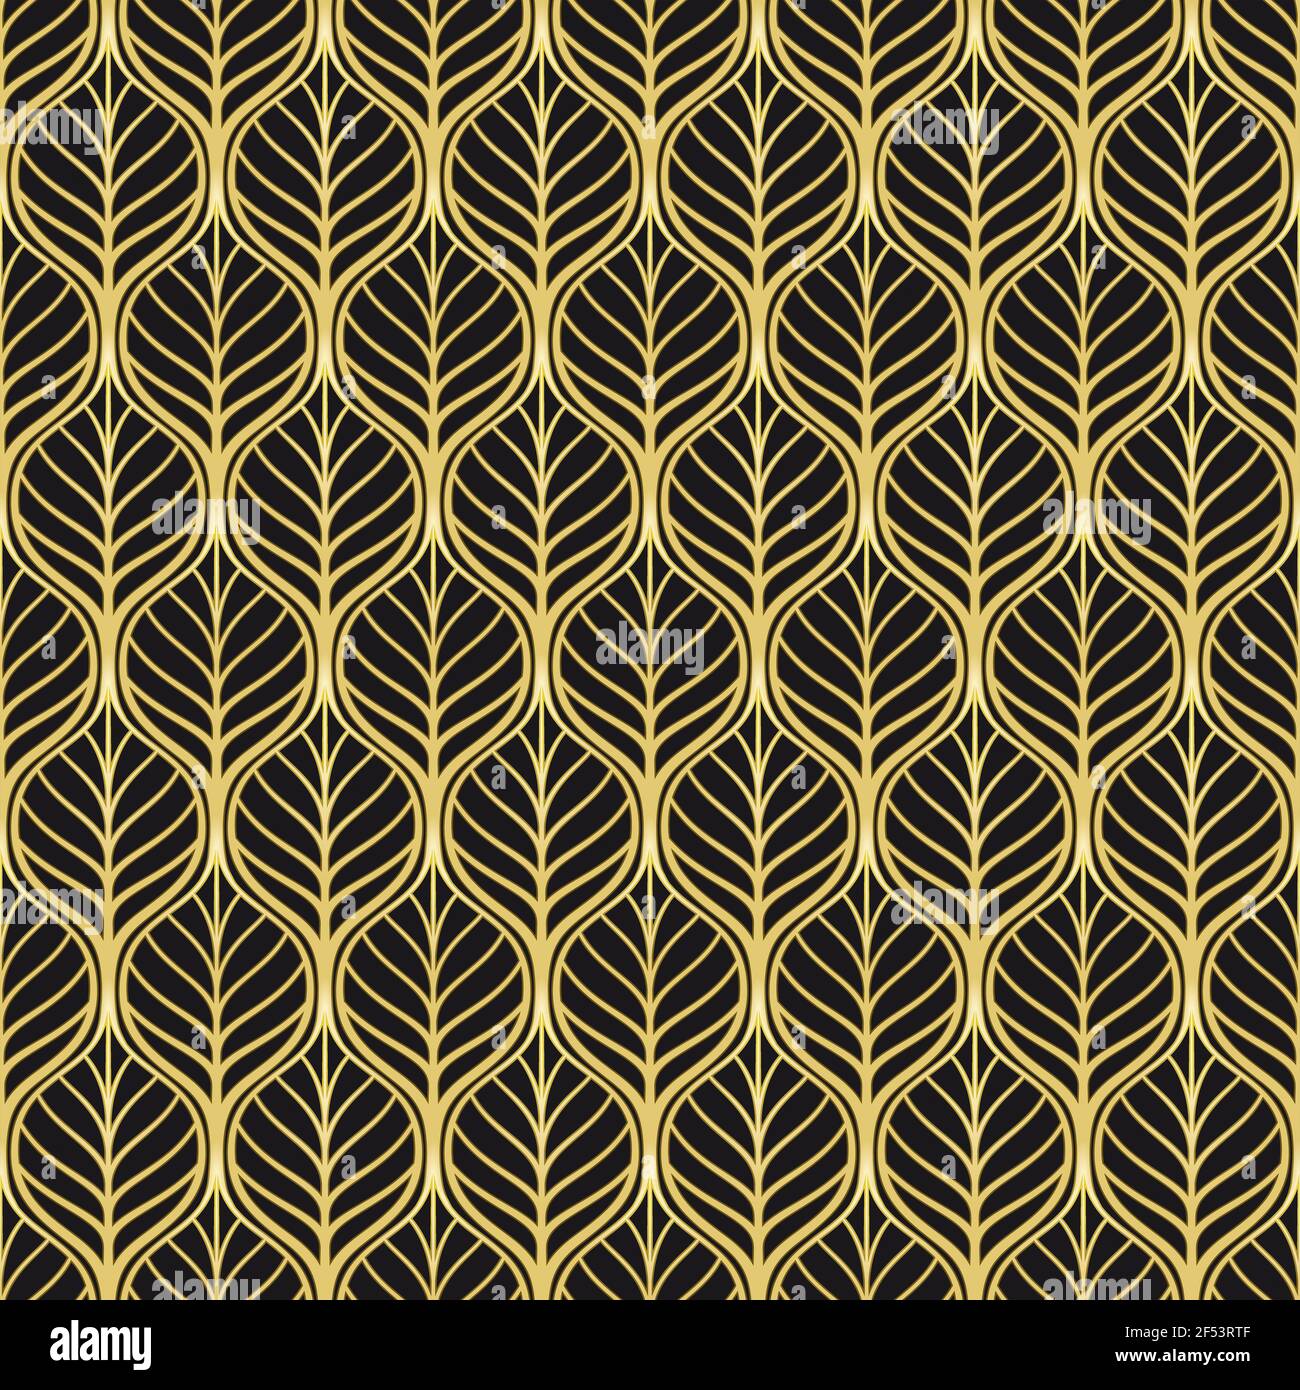 Seamless pattern made in Art-Deco style. Stock Photo